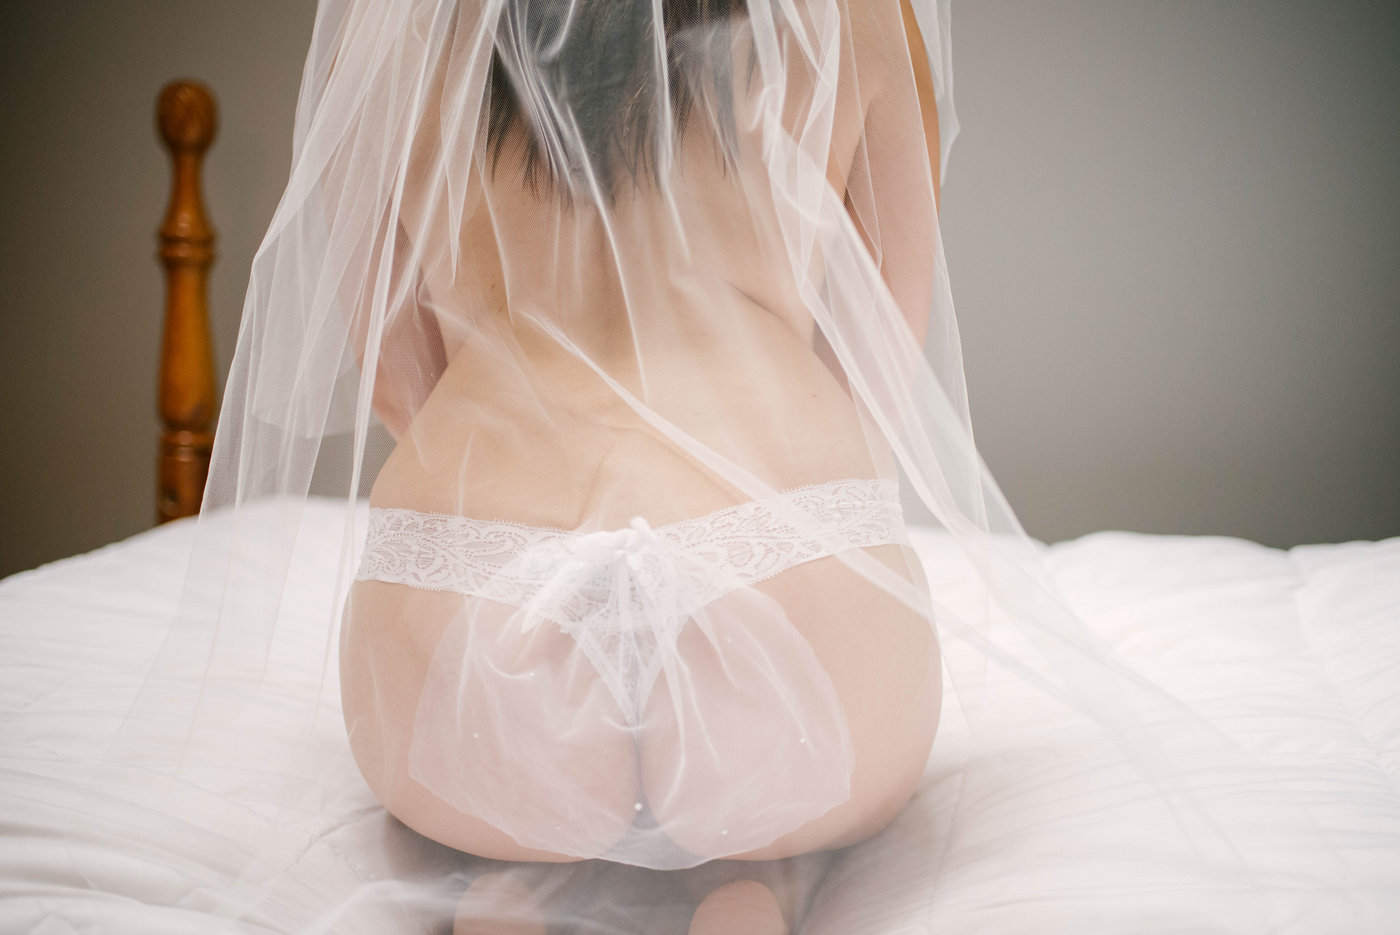 What to wear under your wedding dress